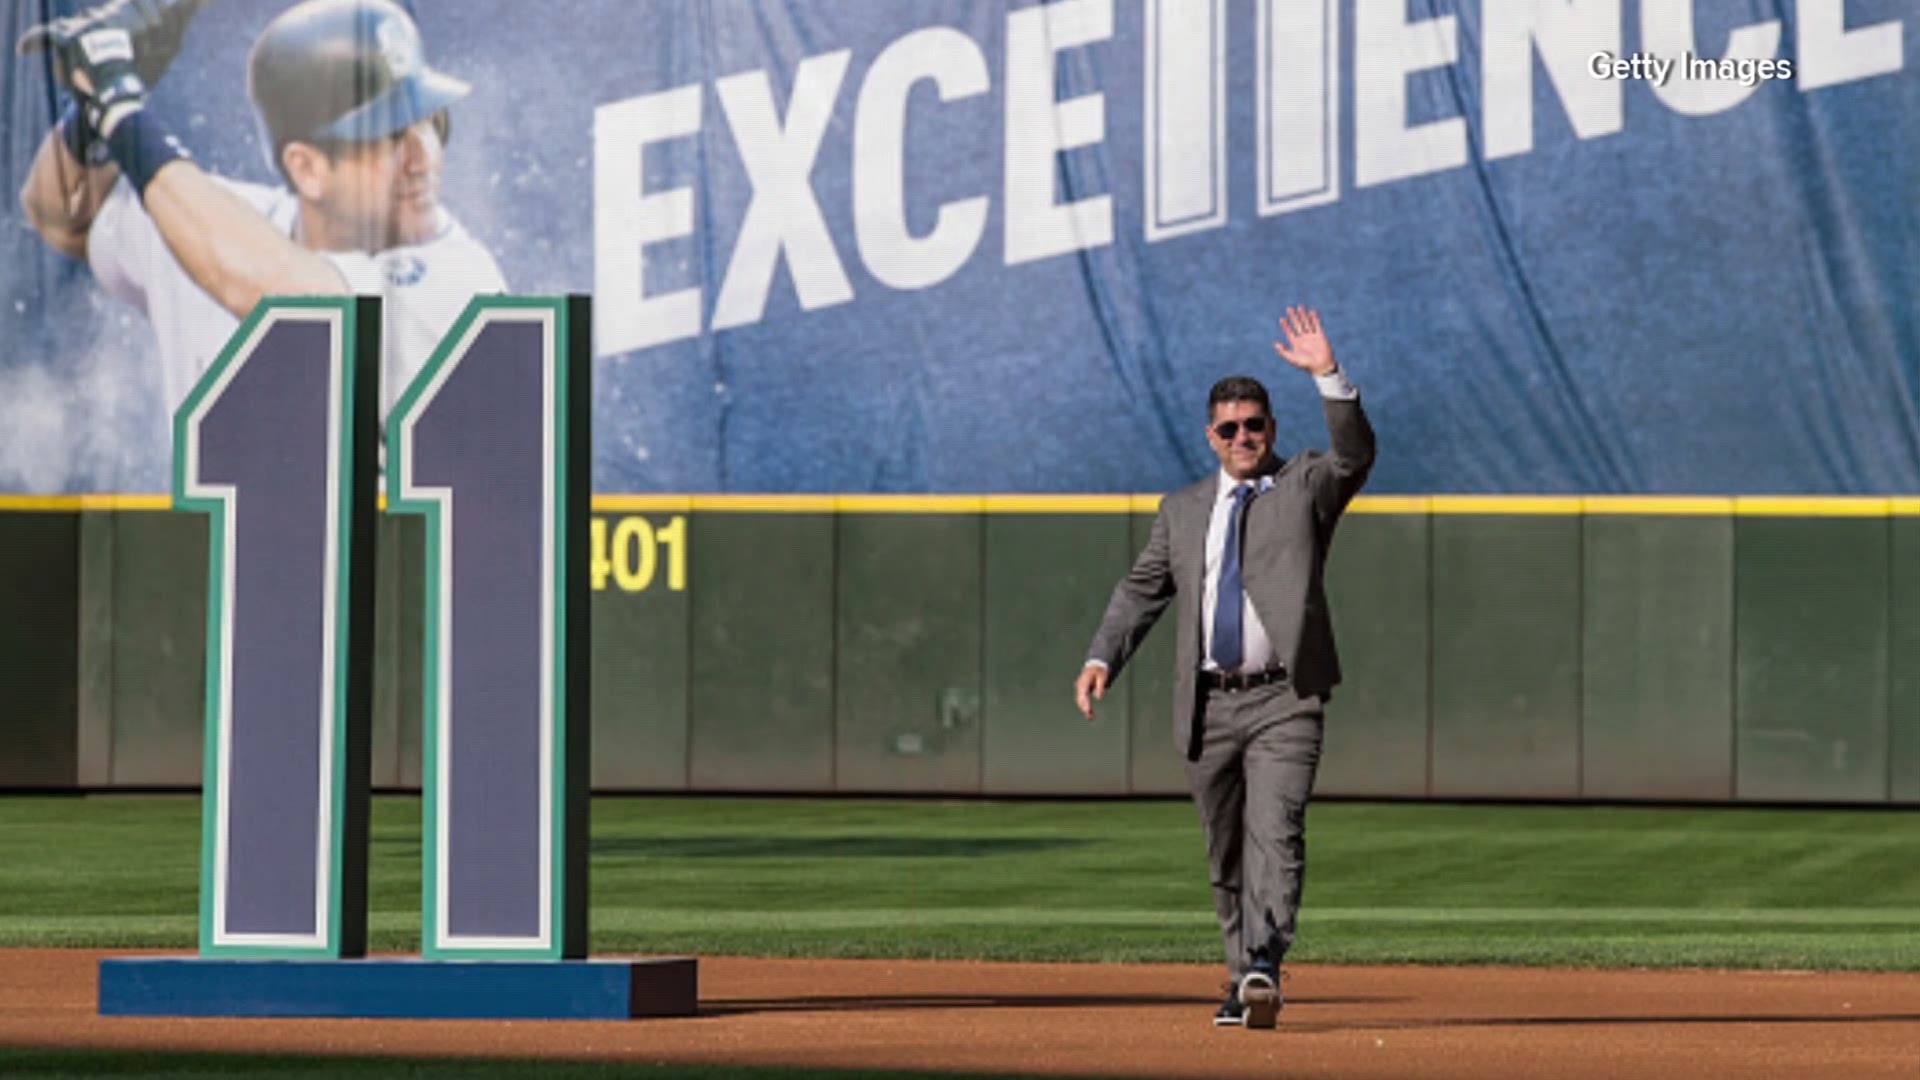 Seattle Mariners legend Edgar Martinez was inducted in the National Baseball Hall of Fame on his 10th and final year of eligibility. He did a phone interview with KING 5